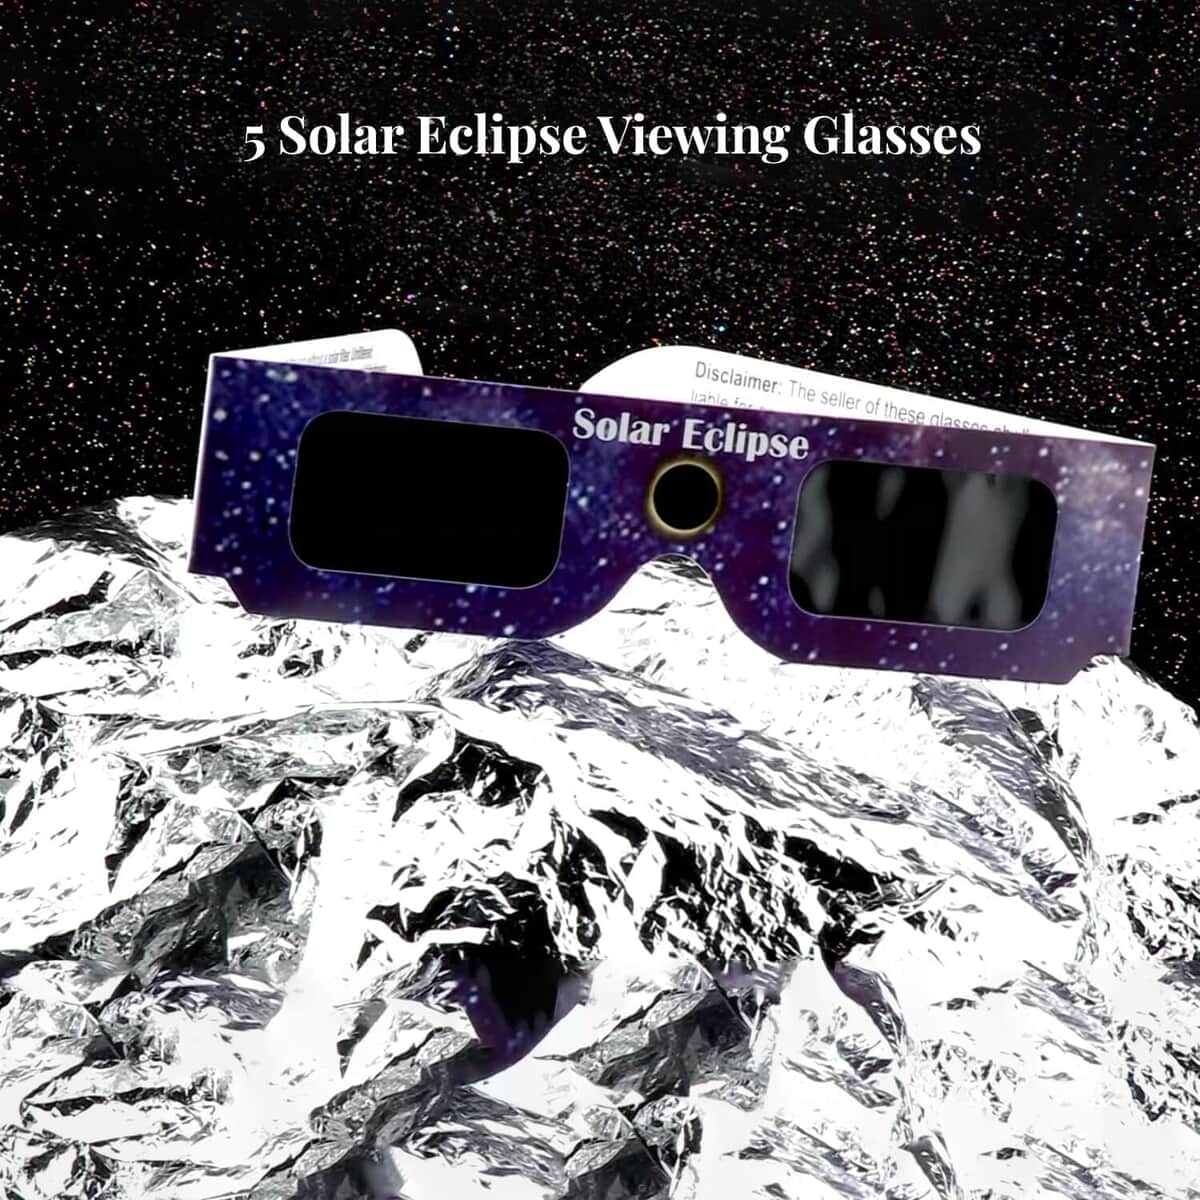 Set of 5 Solar Eclipse Viewing Glasses, Safe Shades for Direct Sun Viewing image number 1